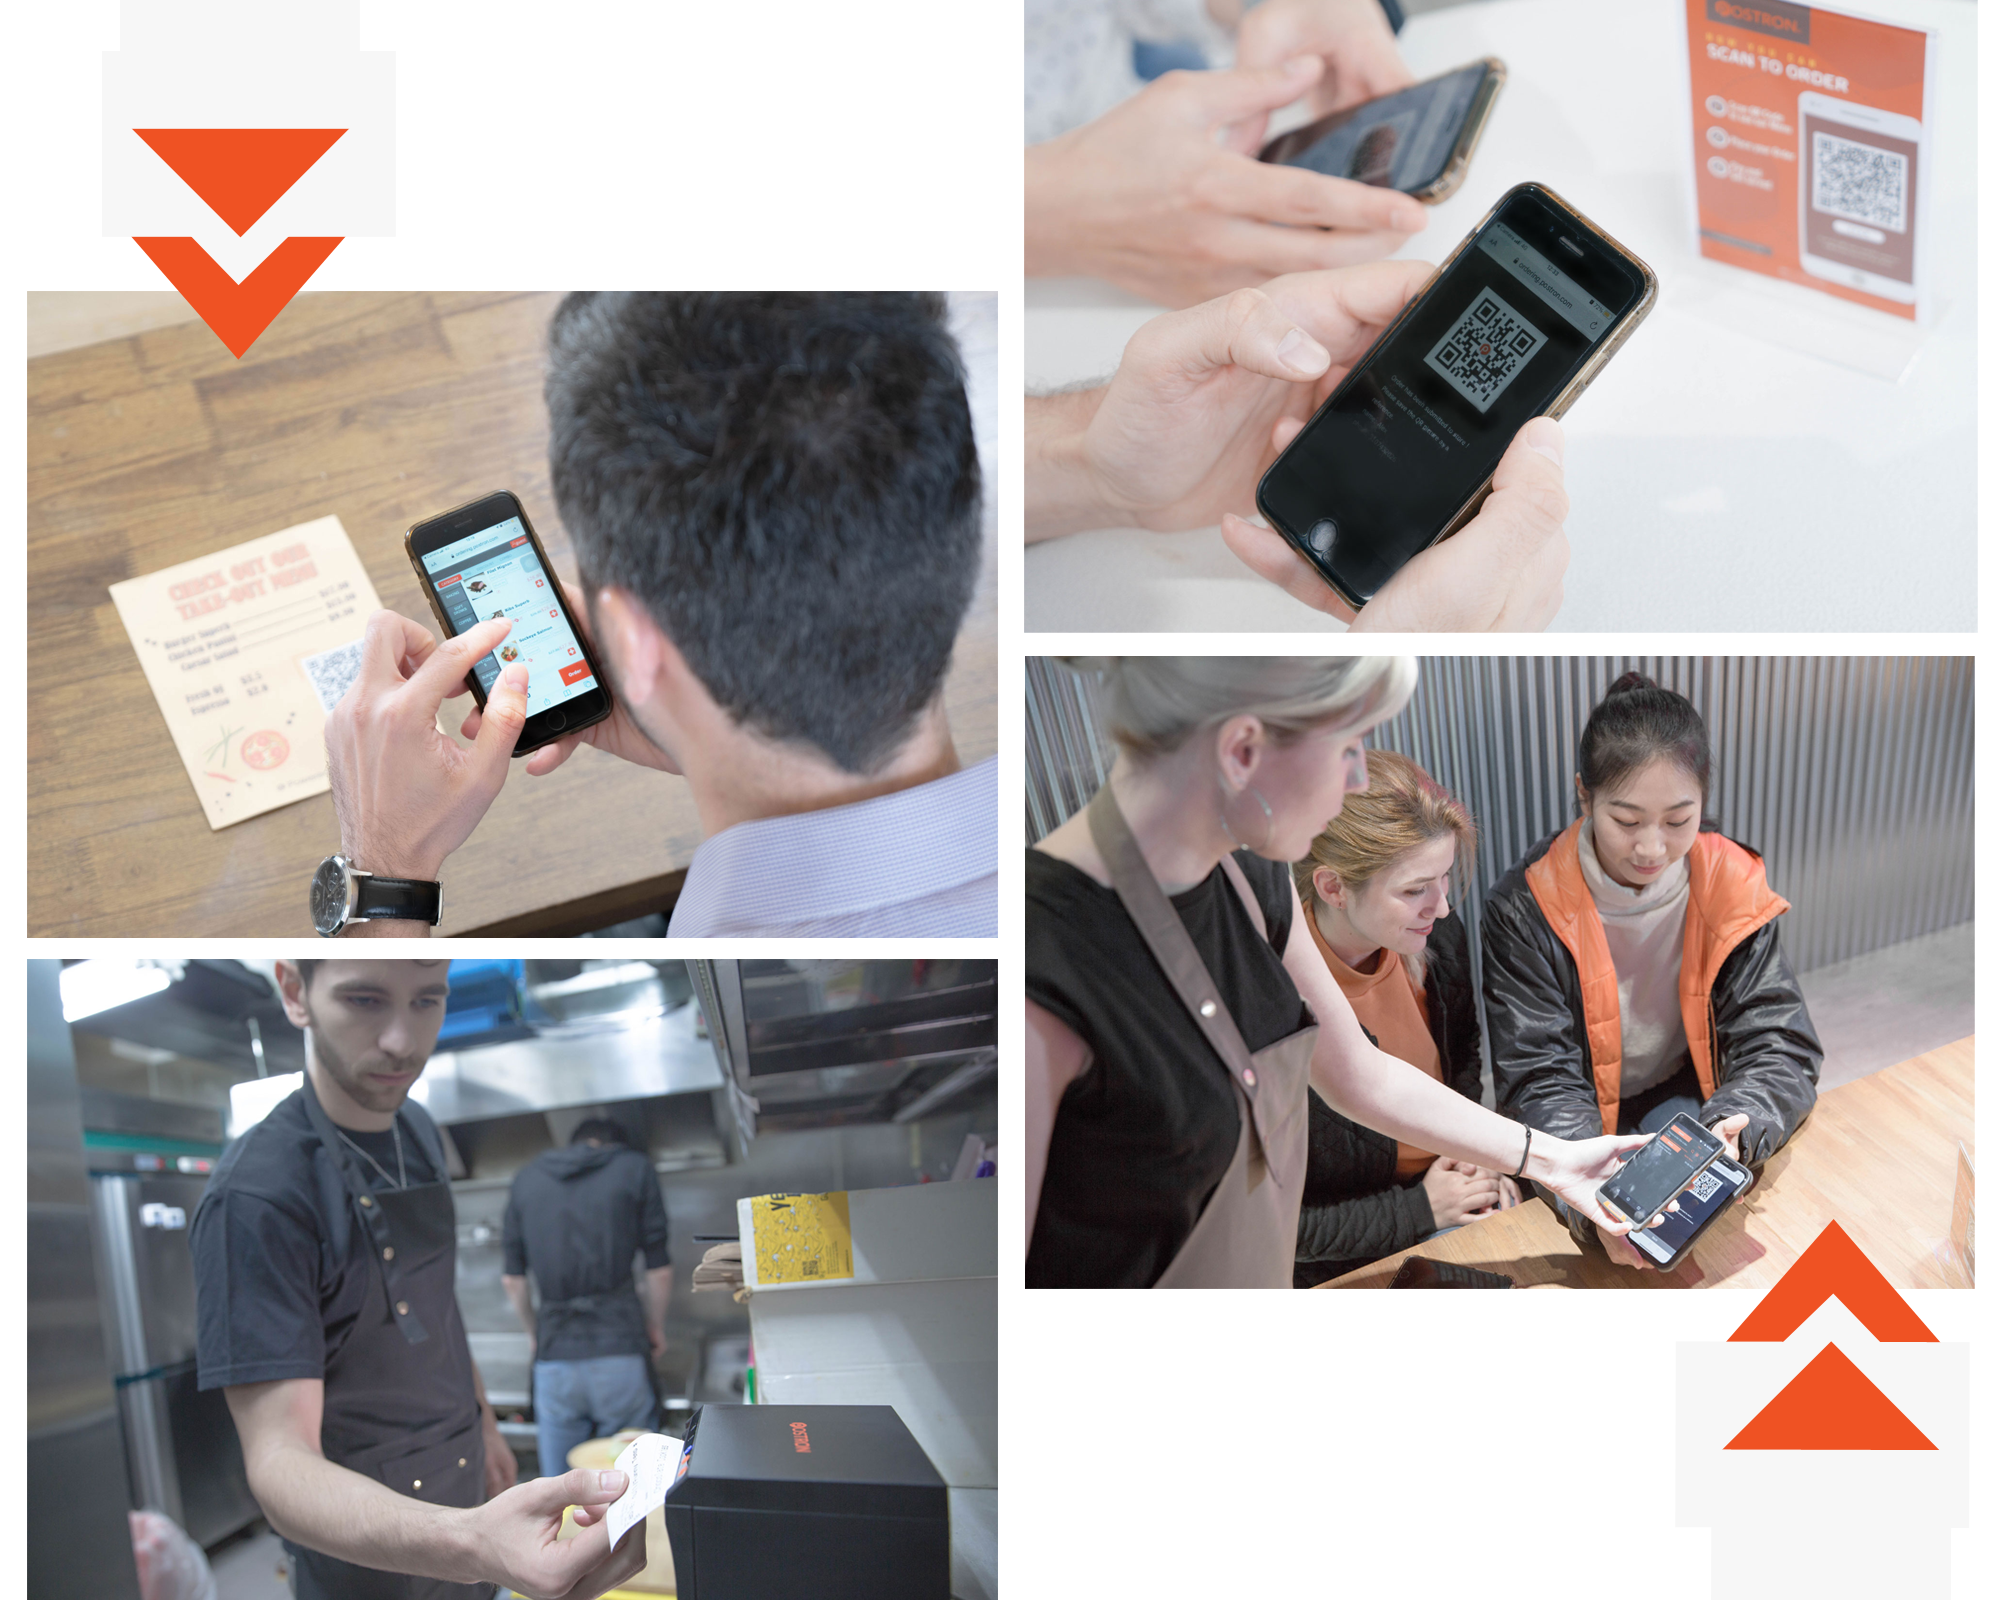 How to make full use of QR codes in your full-service restaurant?